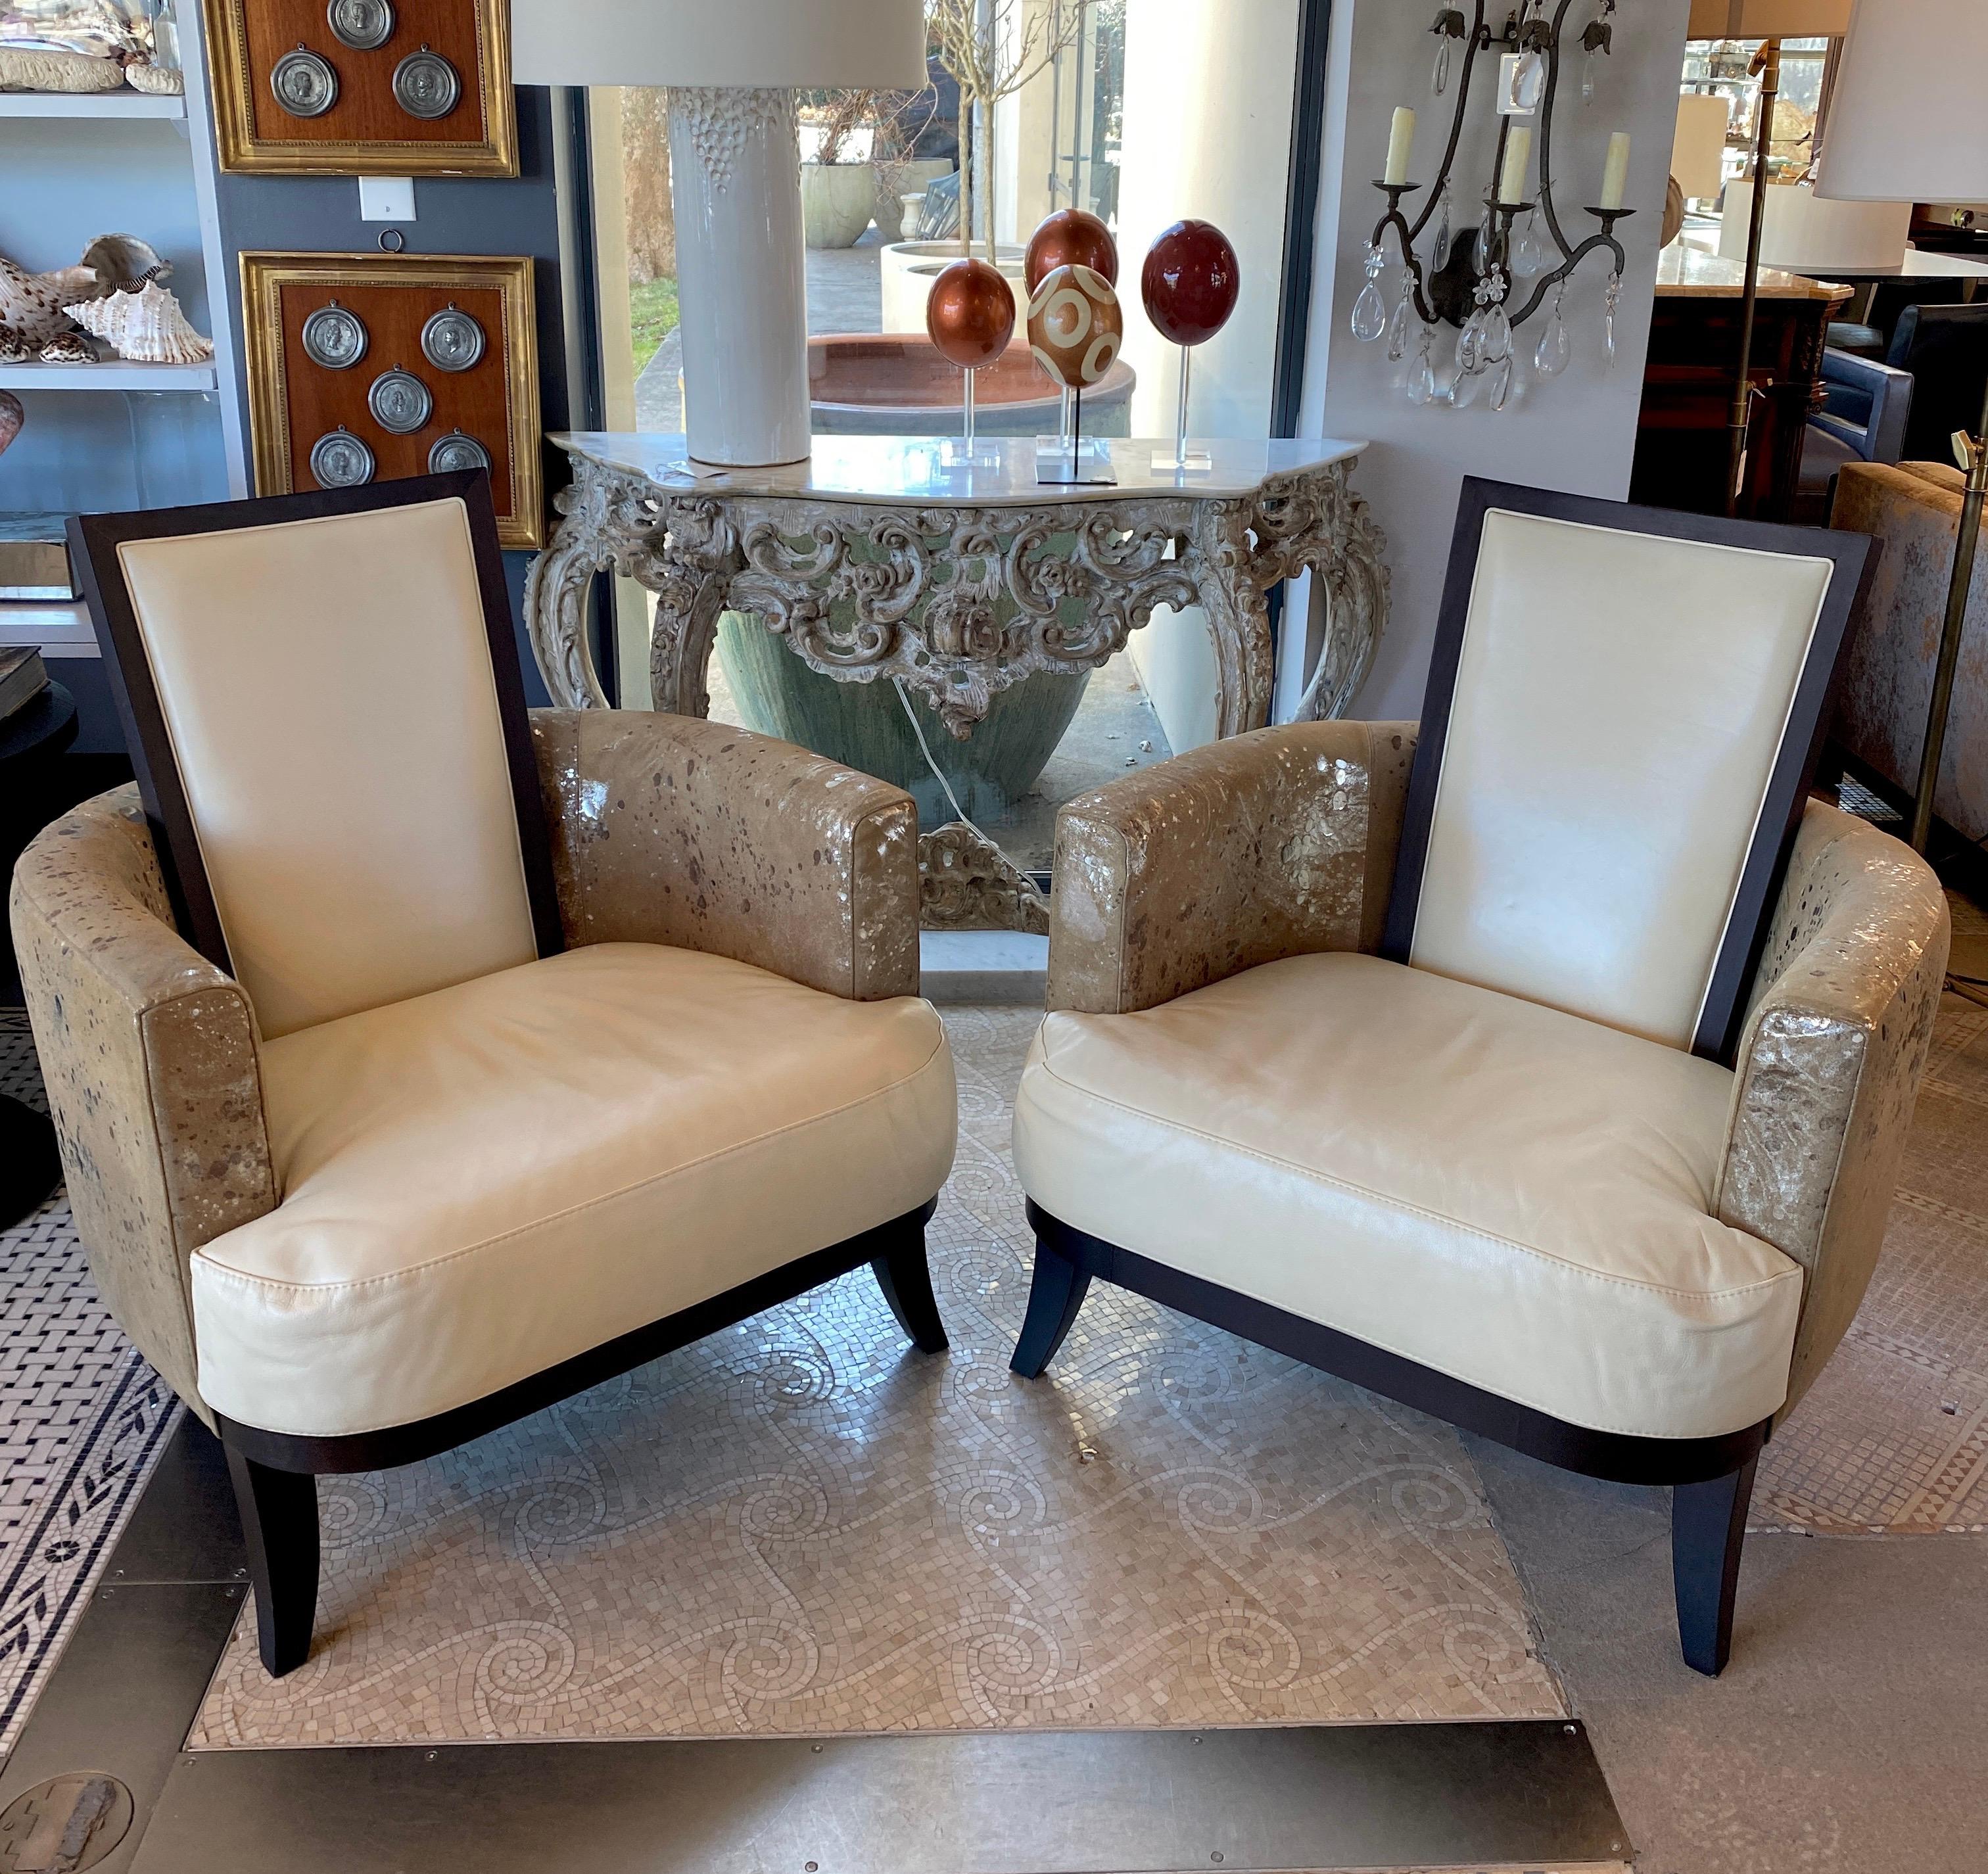 Pair of antique deco two tone chairs 

Cream colored leather paired with a metallic gold and silver fabric, and deep dark wood chair legs.